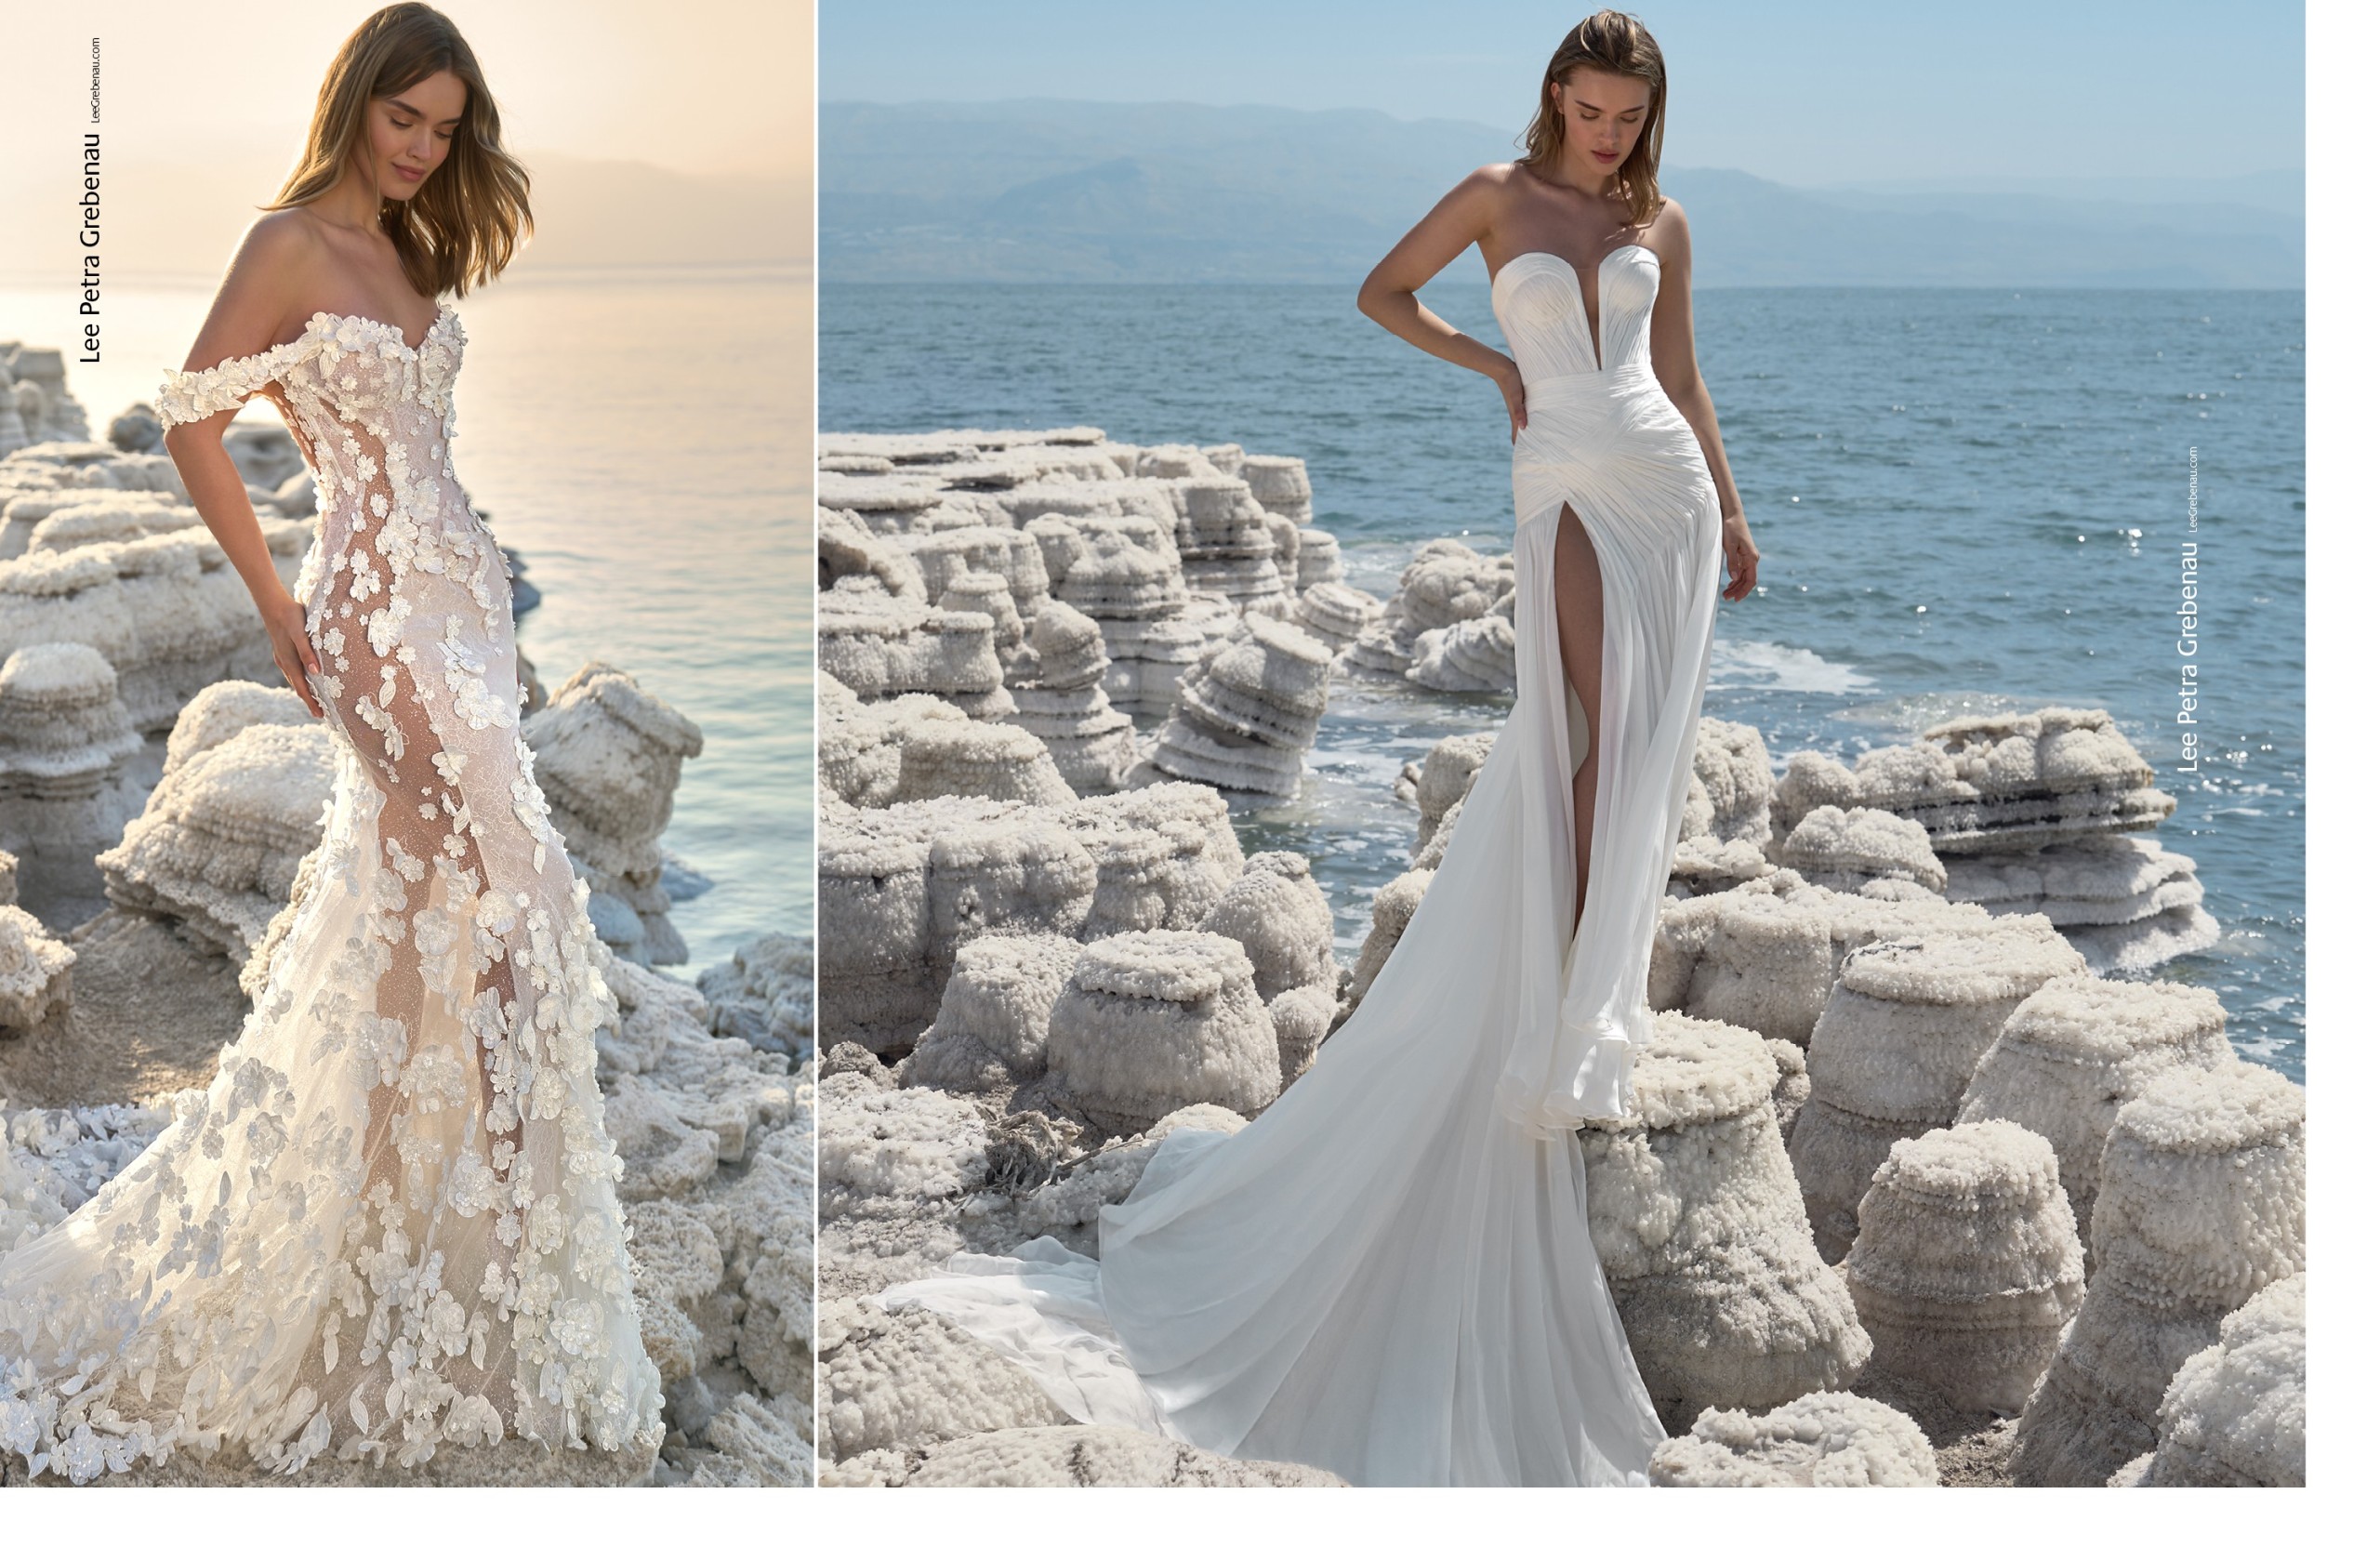 The perfect pleated wedding dress - Inspiration